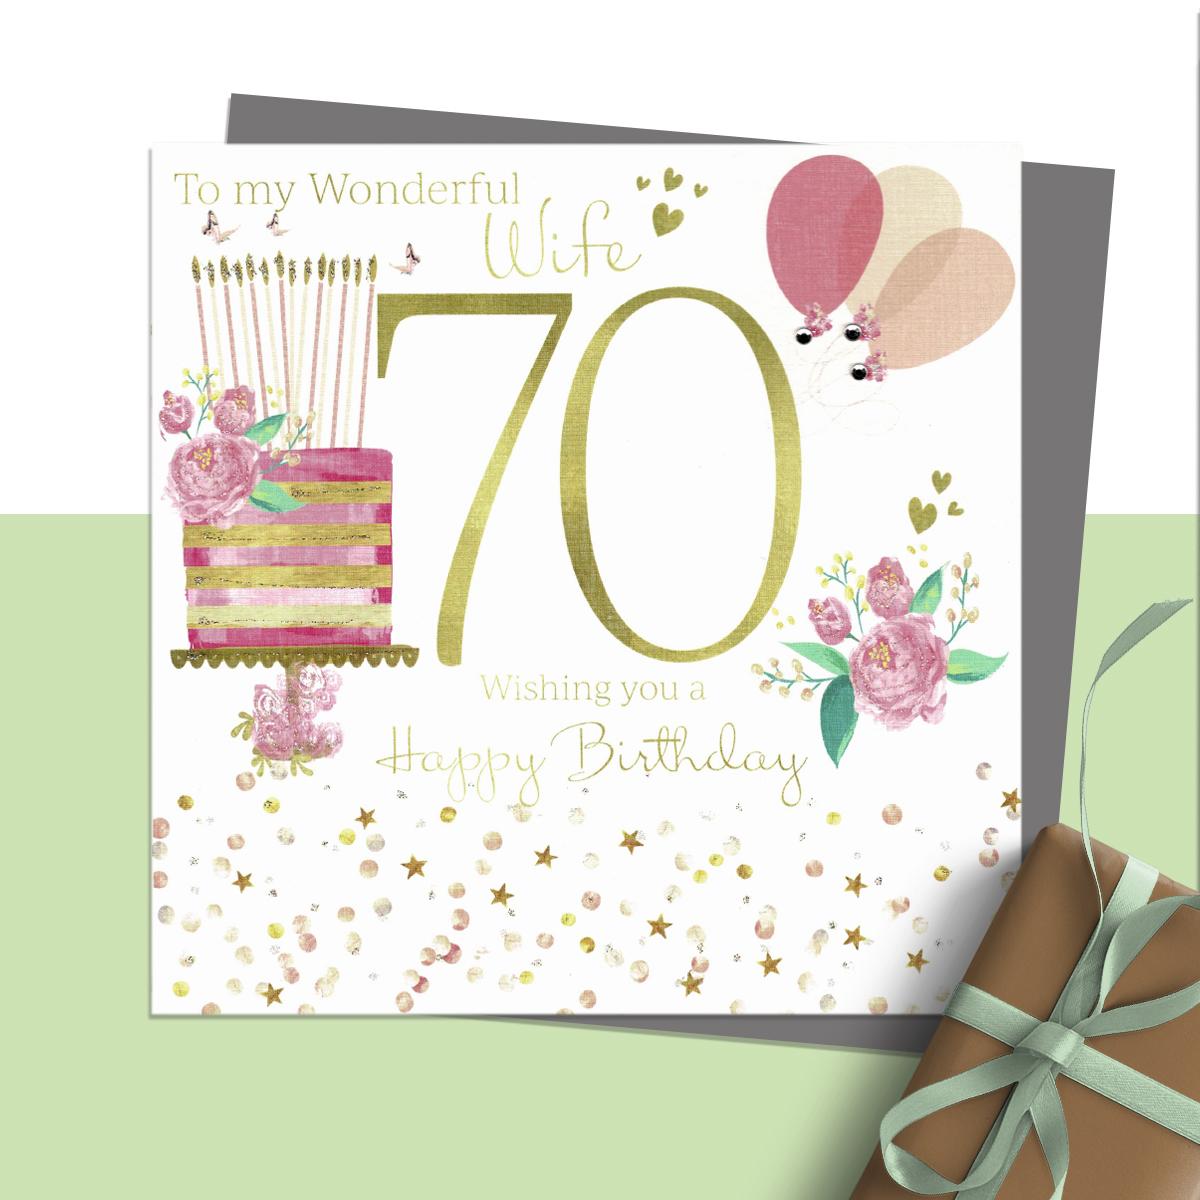 ' To My Wonderful Wife 70 Wishing You A Happy Birthday ' Featuring Cake, Candles And Balloons. Hand Finished With Sparkle And Jewel Embellishments. Blank For Own Message. Complete With Silver Coloured Envelope